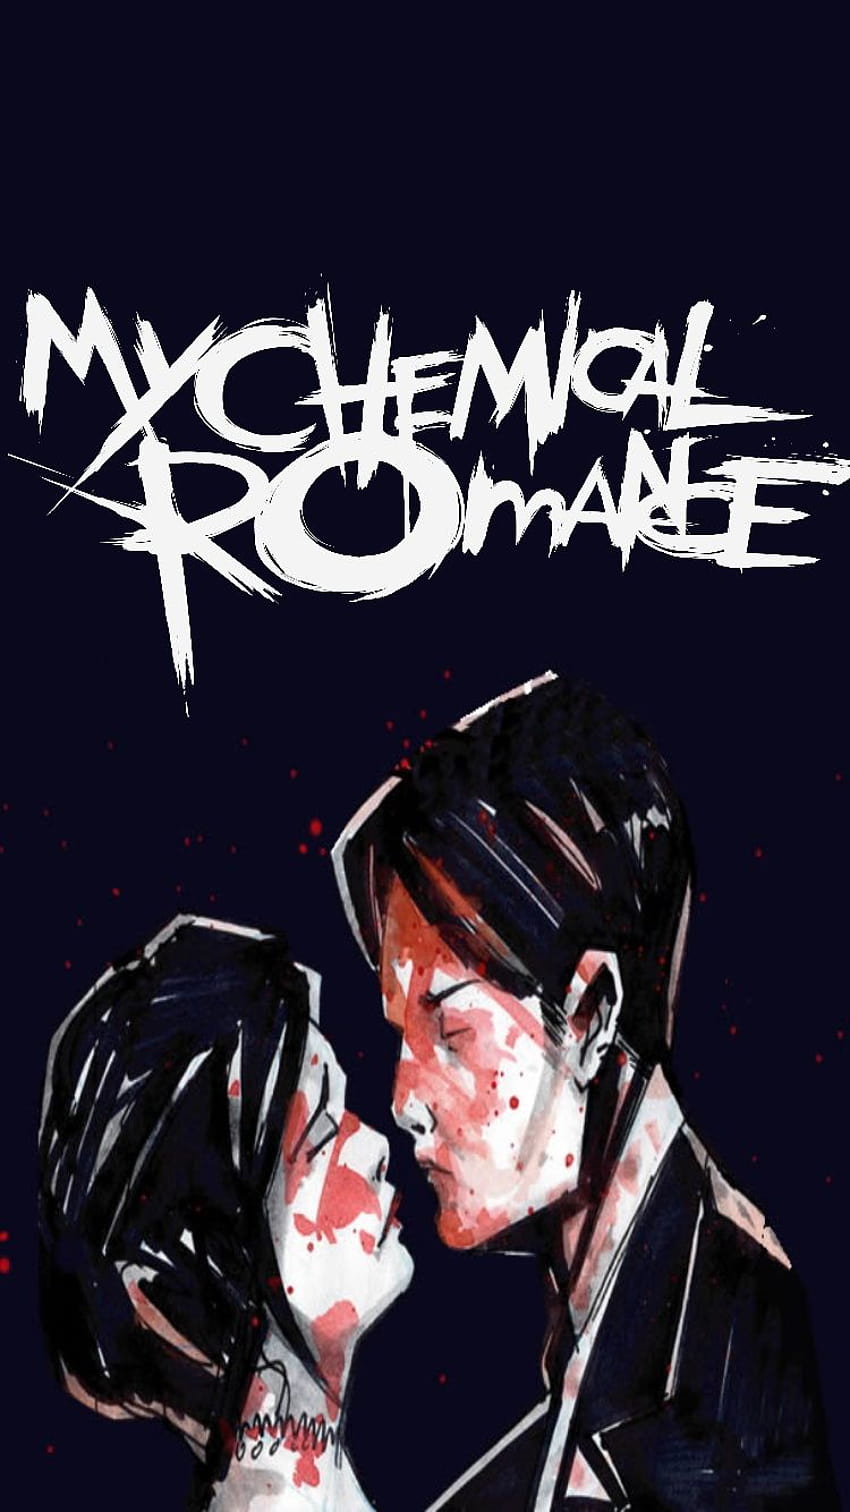 Three Cheers For Sweet Revenge My Chemical Romance I Brought You My Bullets  PNG Clipart Album